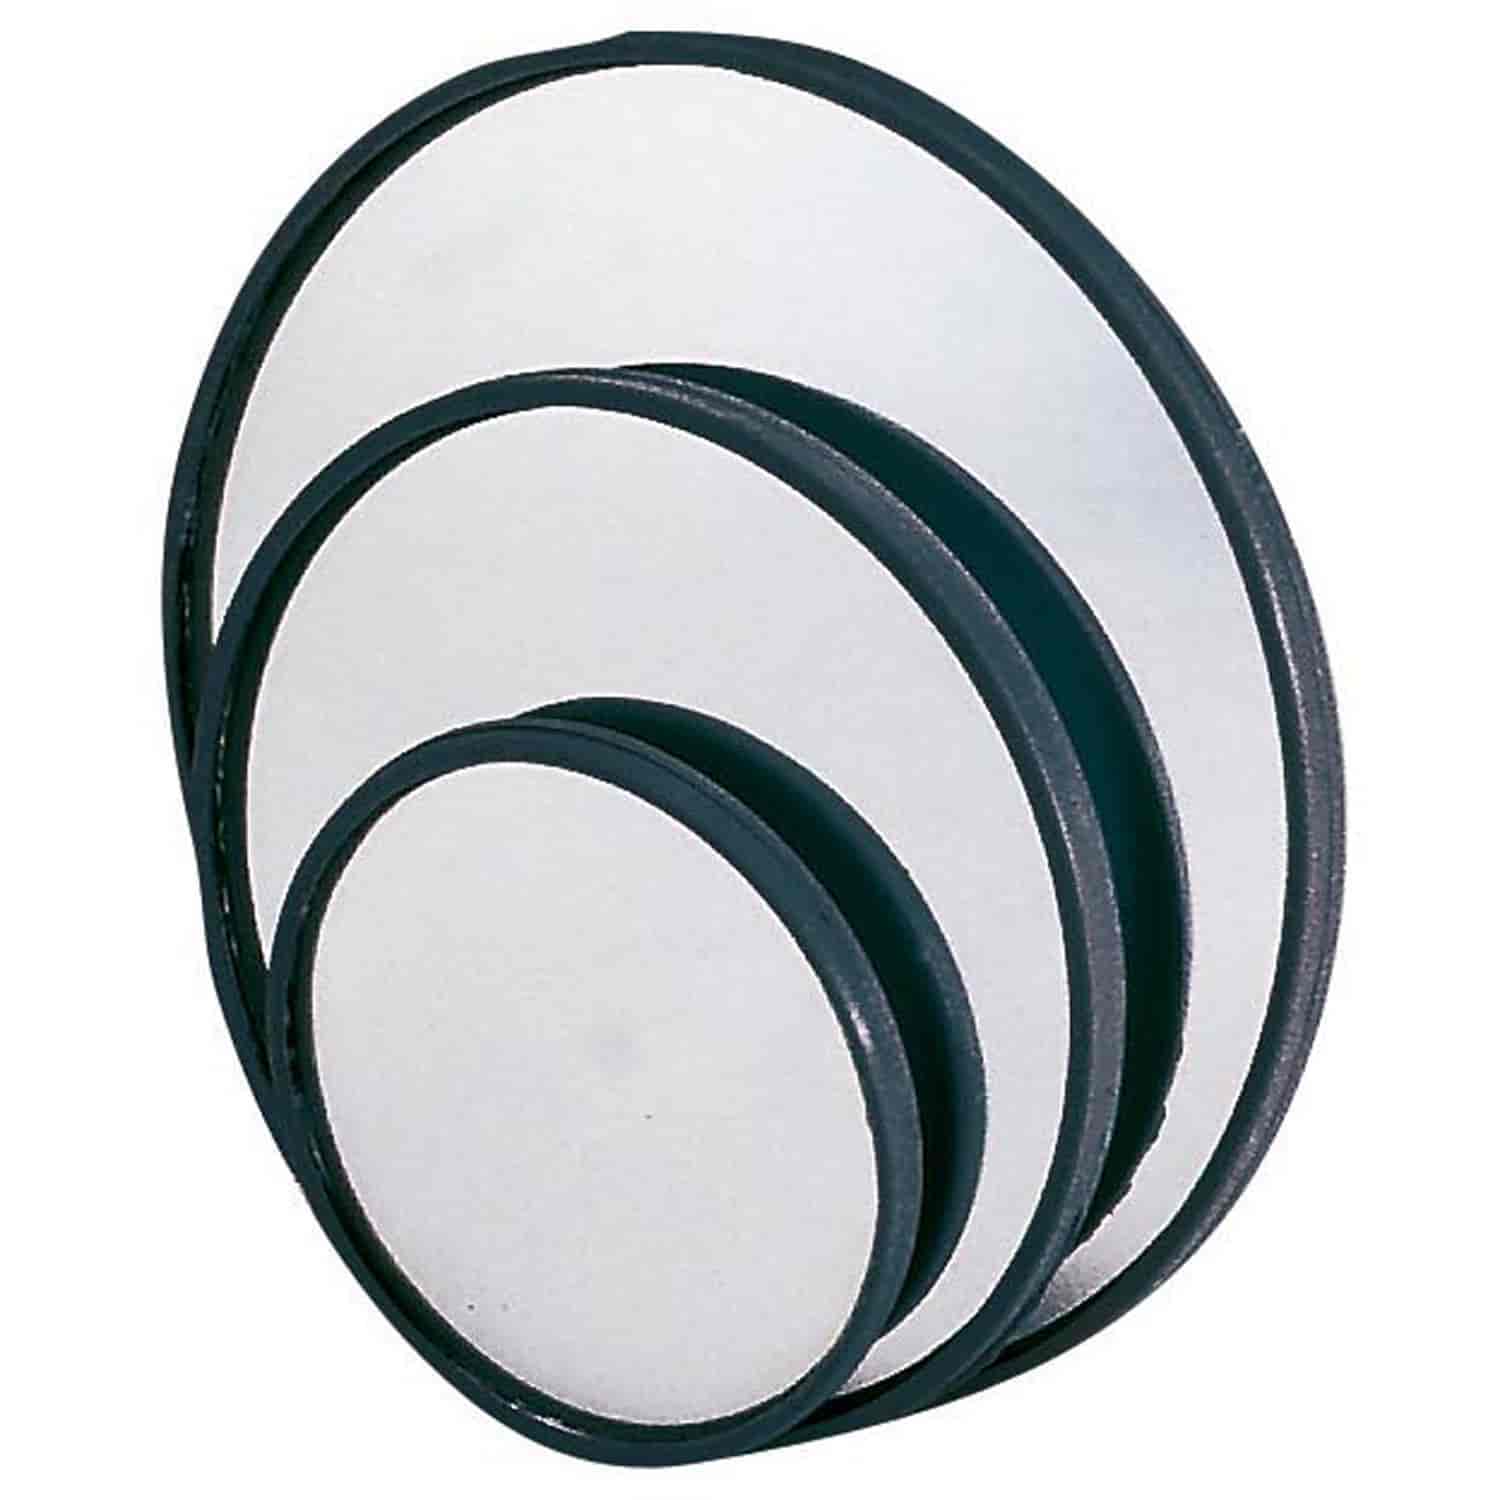 Stick-On Round Mirror This mirror is 3-3/4 inches